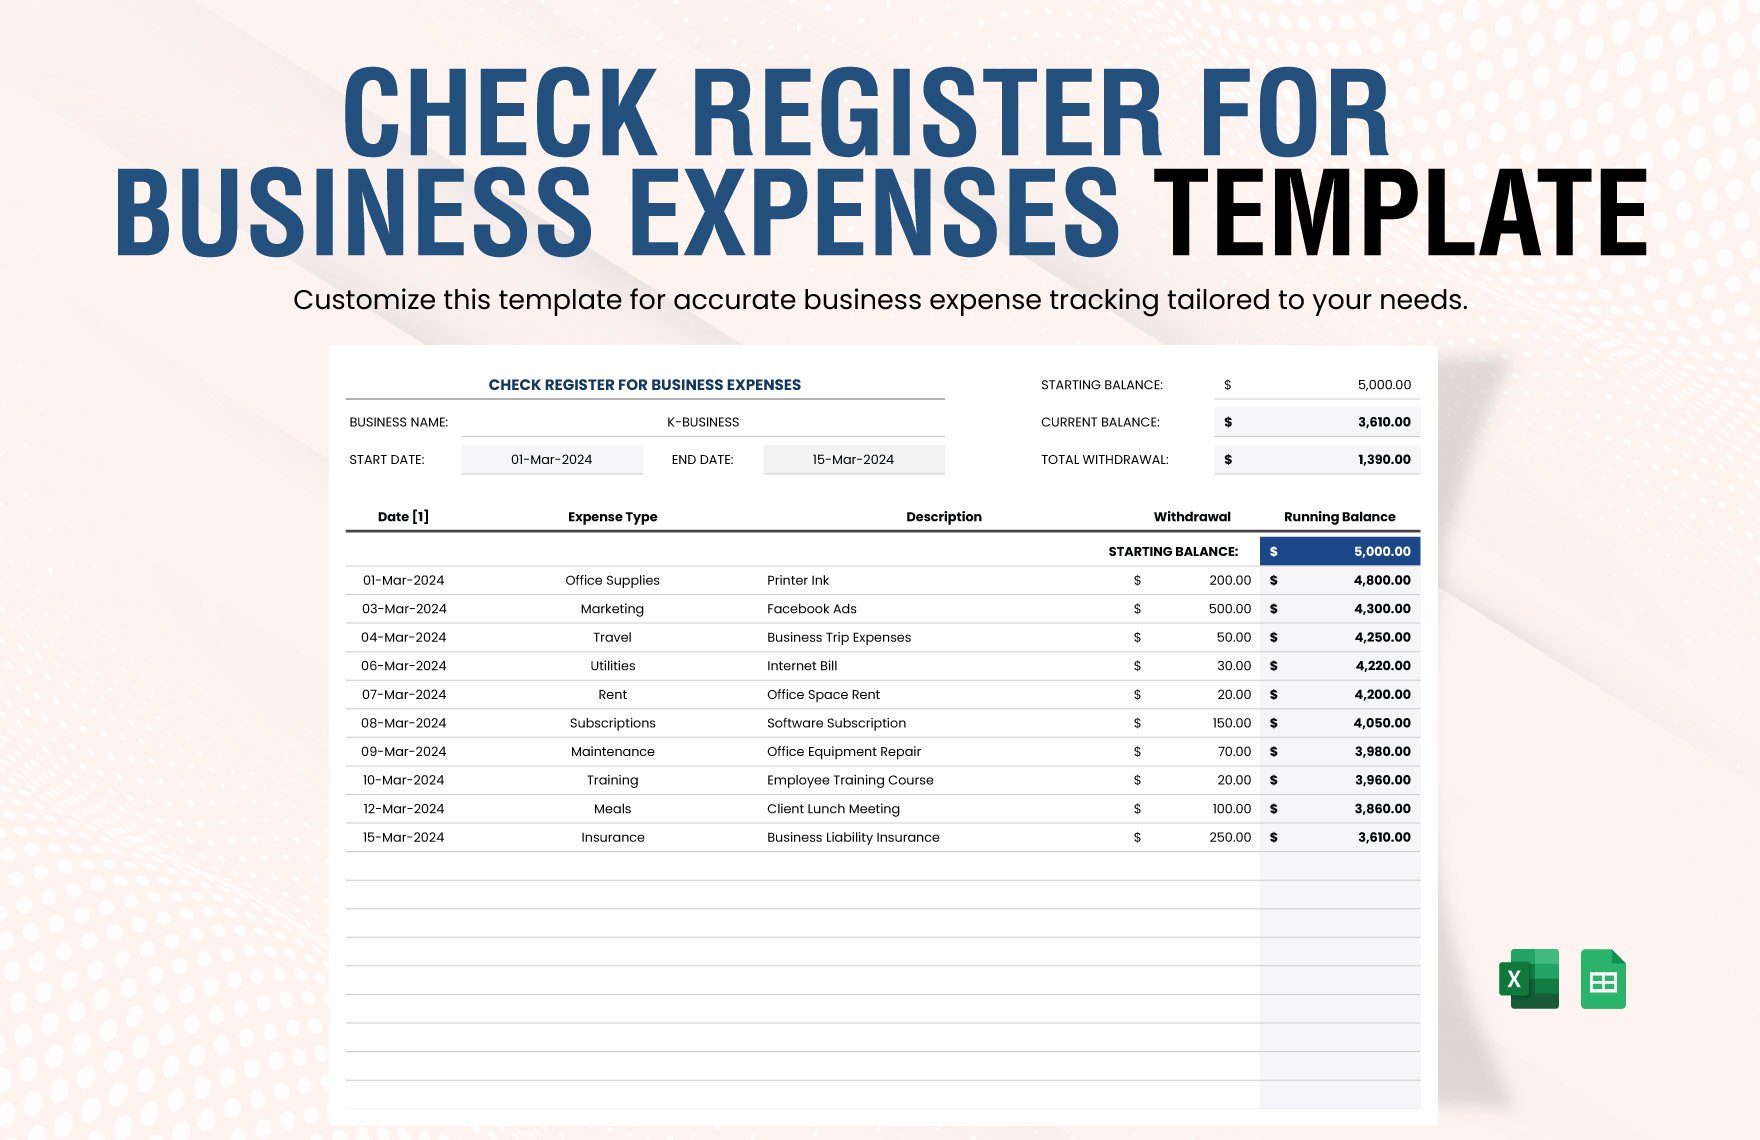 Check Register for Business Expenses Template